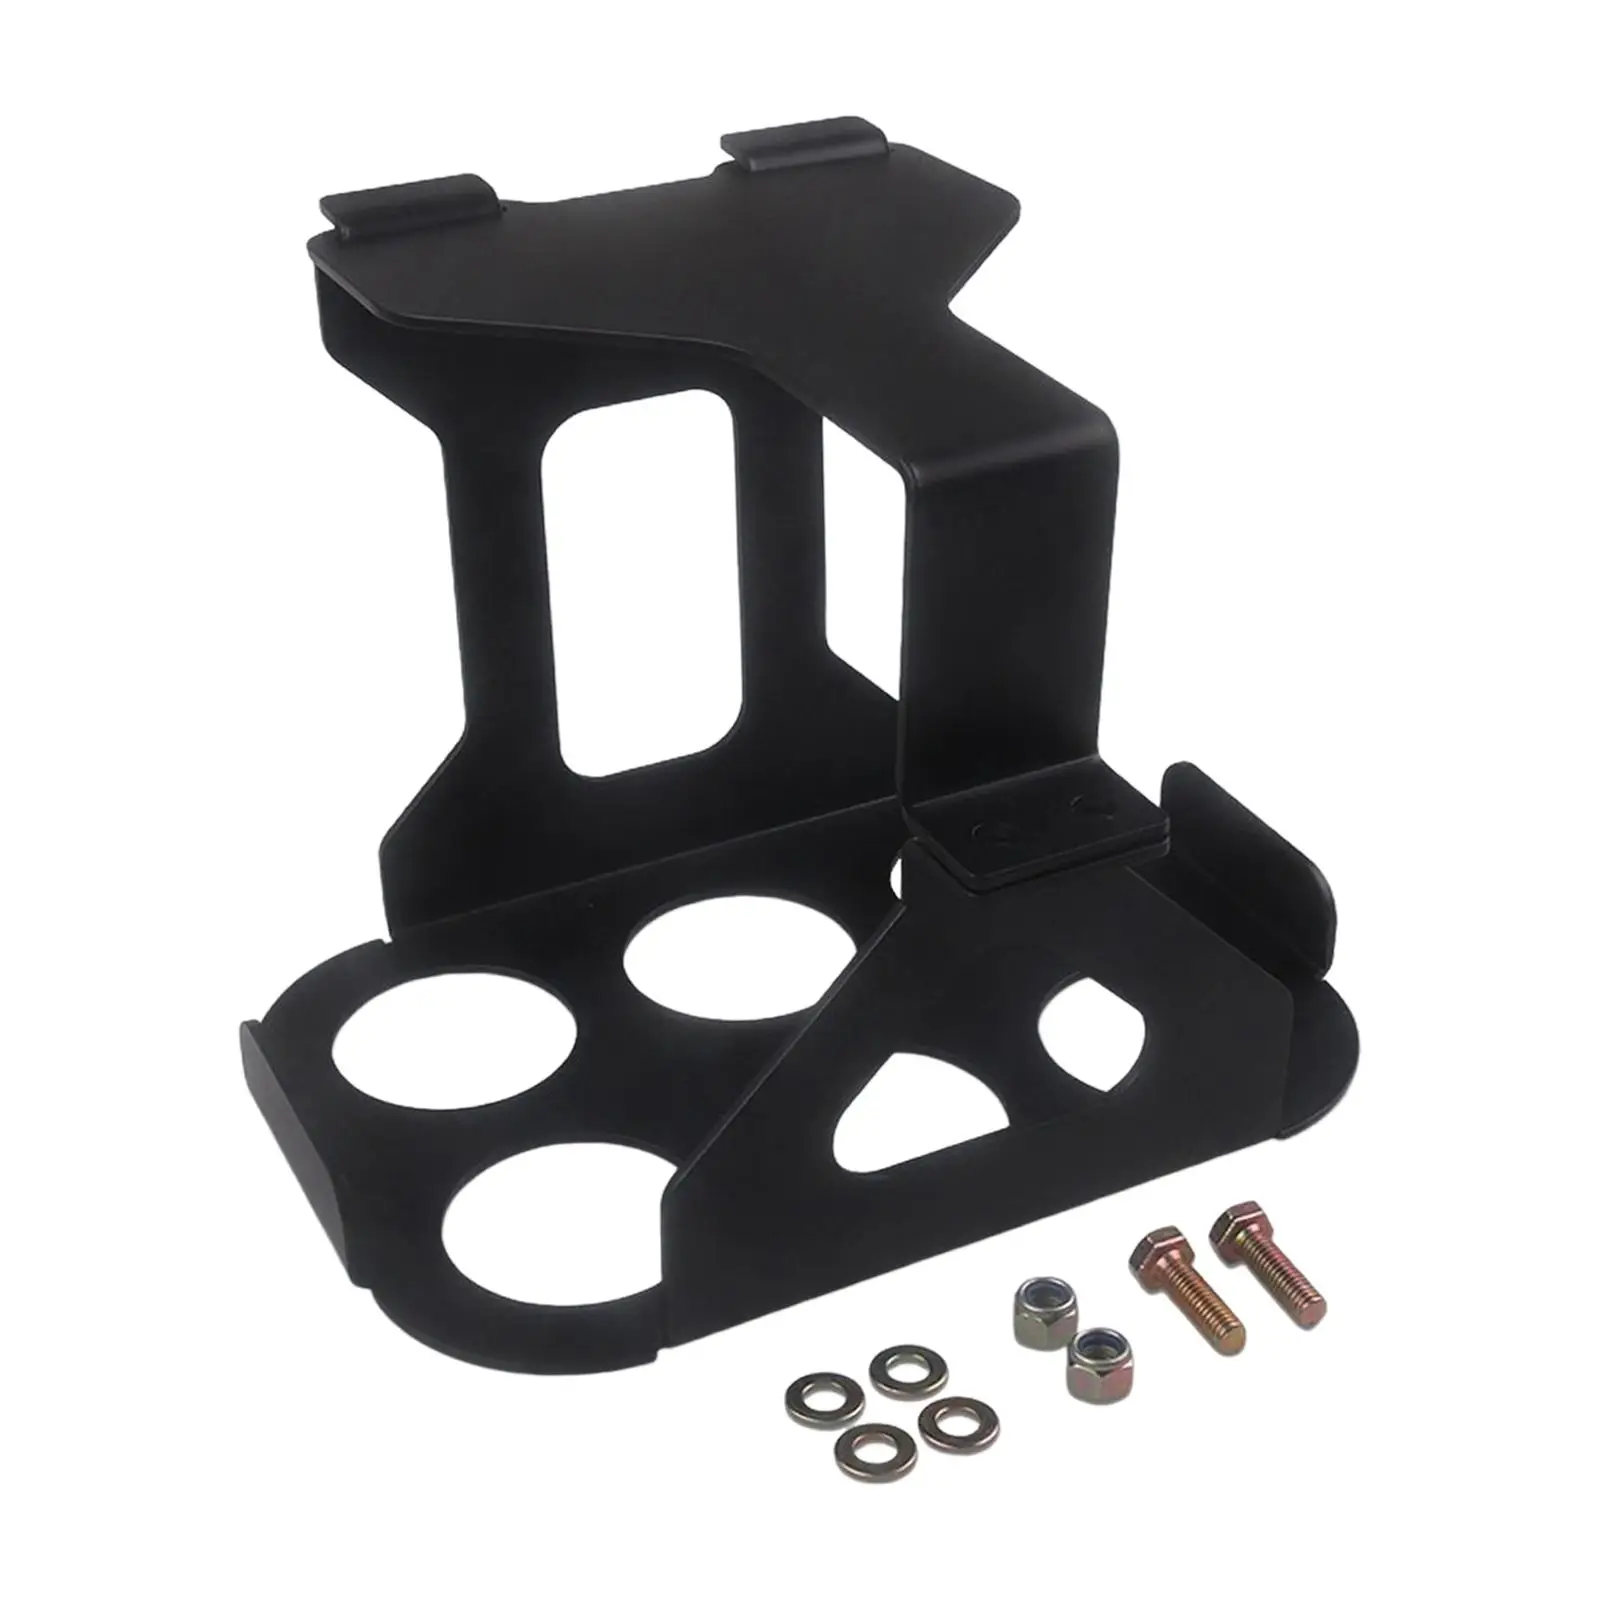 Black Battery Box Tray Durable Repair Parts Direct Replaces Metal Accessories